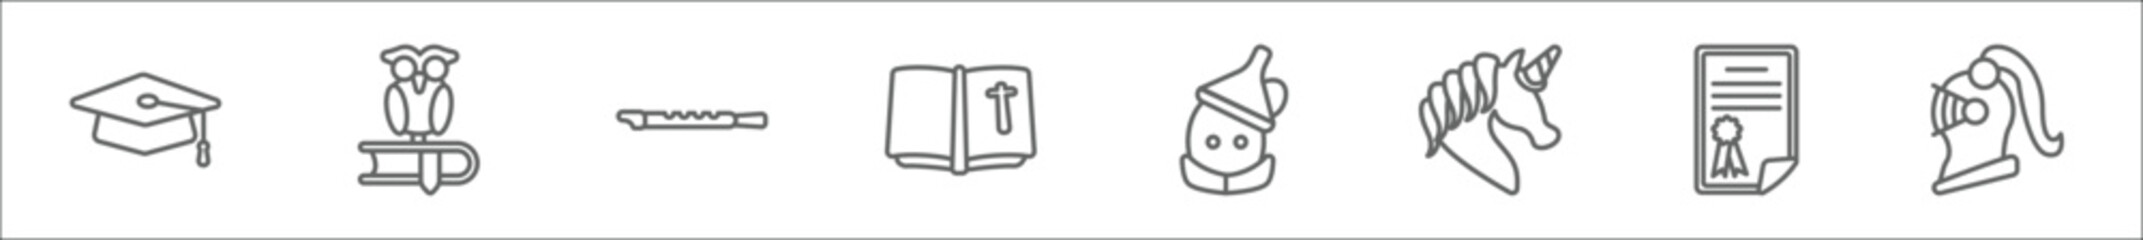 outline set of literature line icons. linear vector icons such as mortarboard, owl, flute, religion, wizard of oz, unicorn, thesis, knight